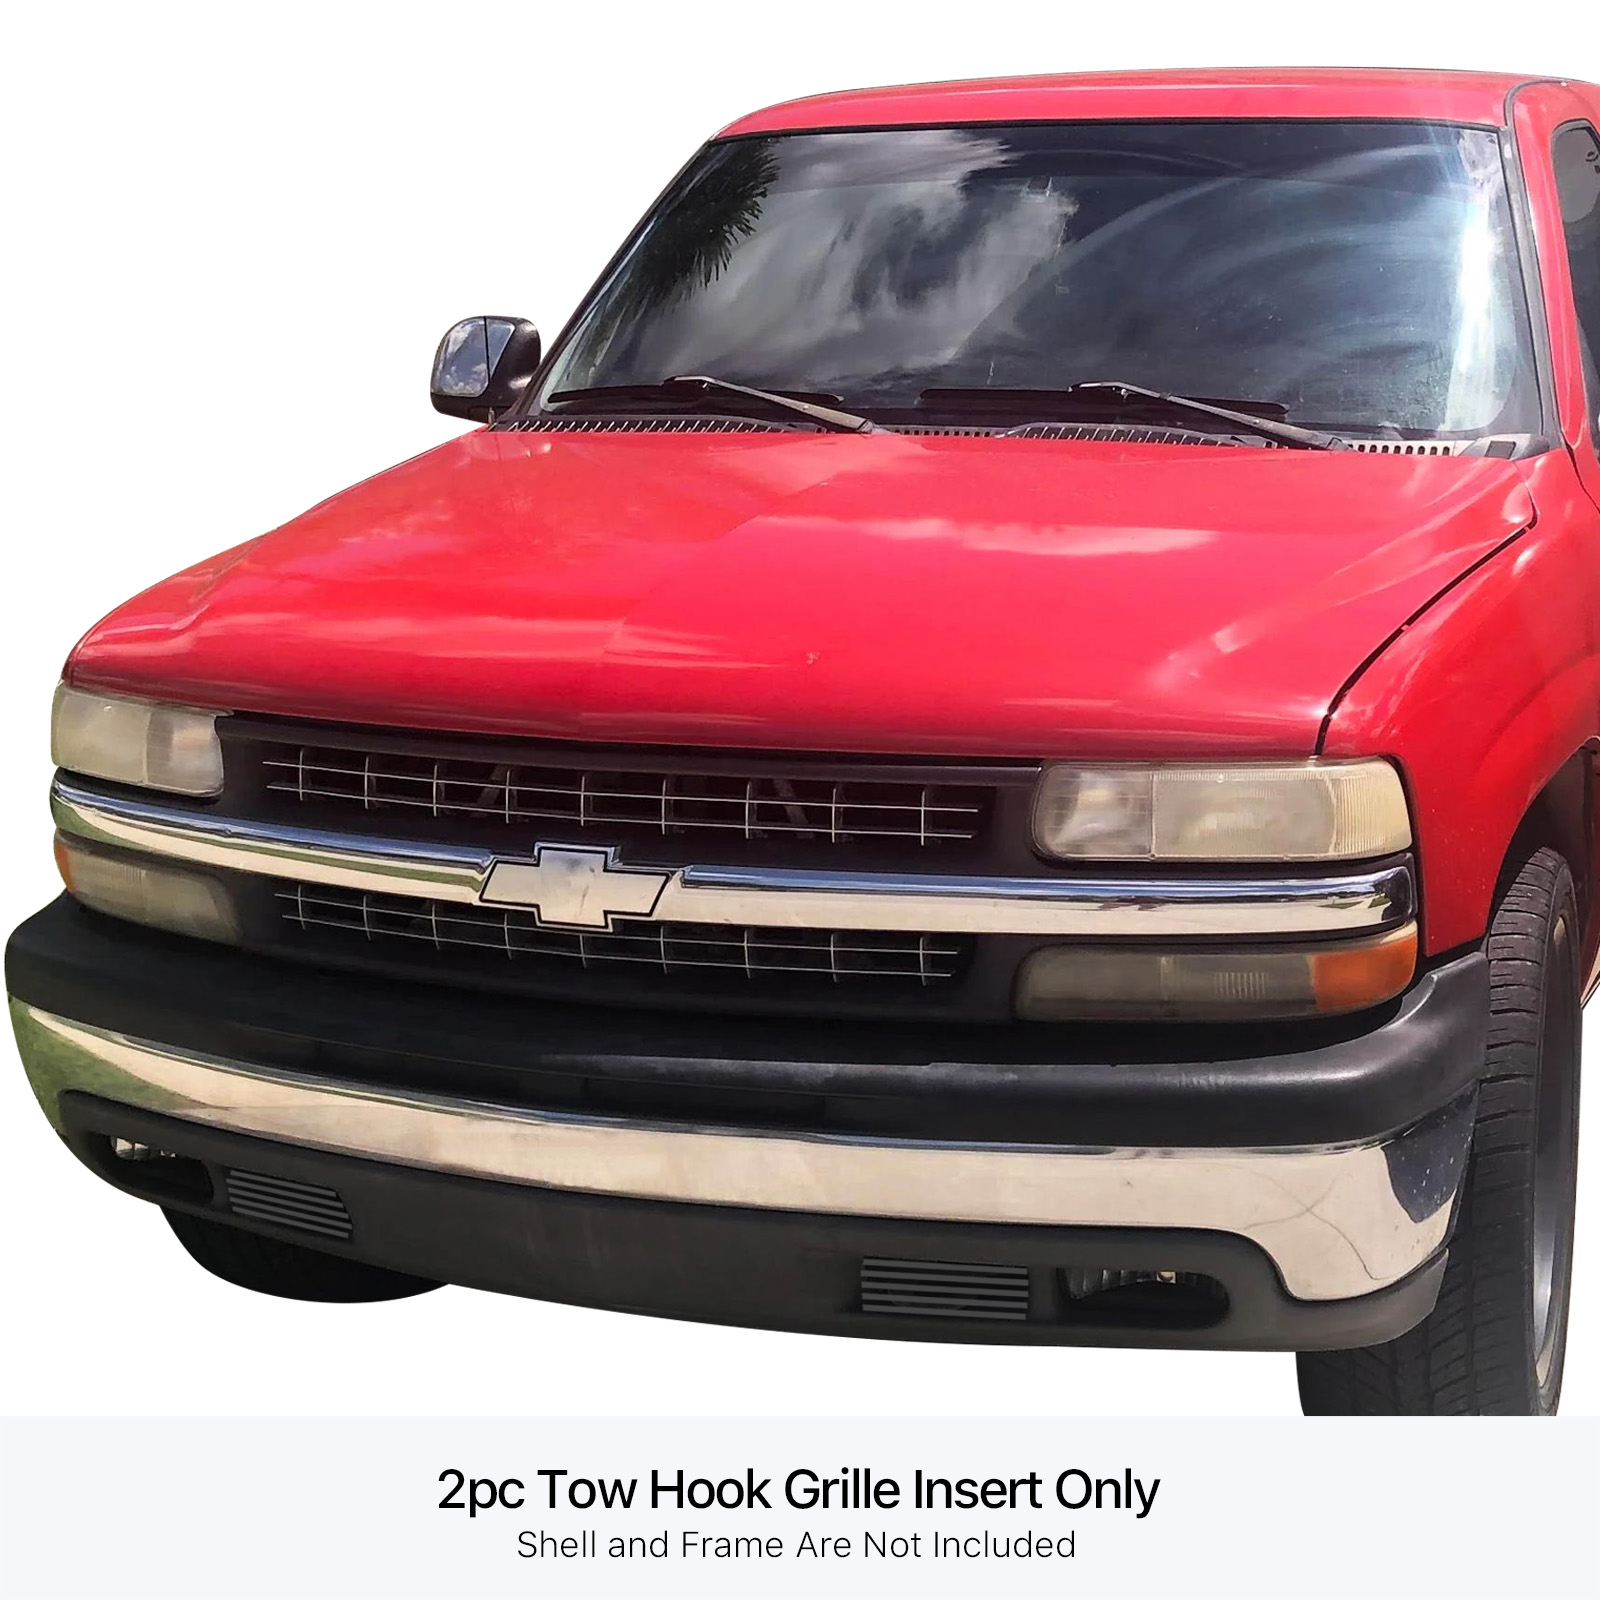 1999-2002 Chevy Silverado 1500 /2000-2006 Chevy Suburban Only For Z71 And With Round Fog Lamps/2000-2006 Chevy Tahoe Only For Z71 And With Round Fog Lamps TOW HOOK Black Stainless Steel Billet Grille